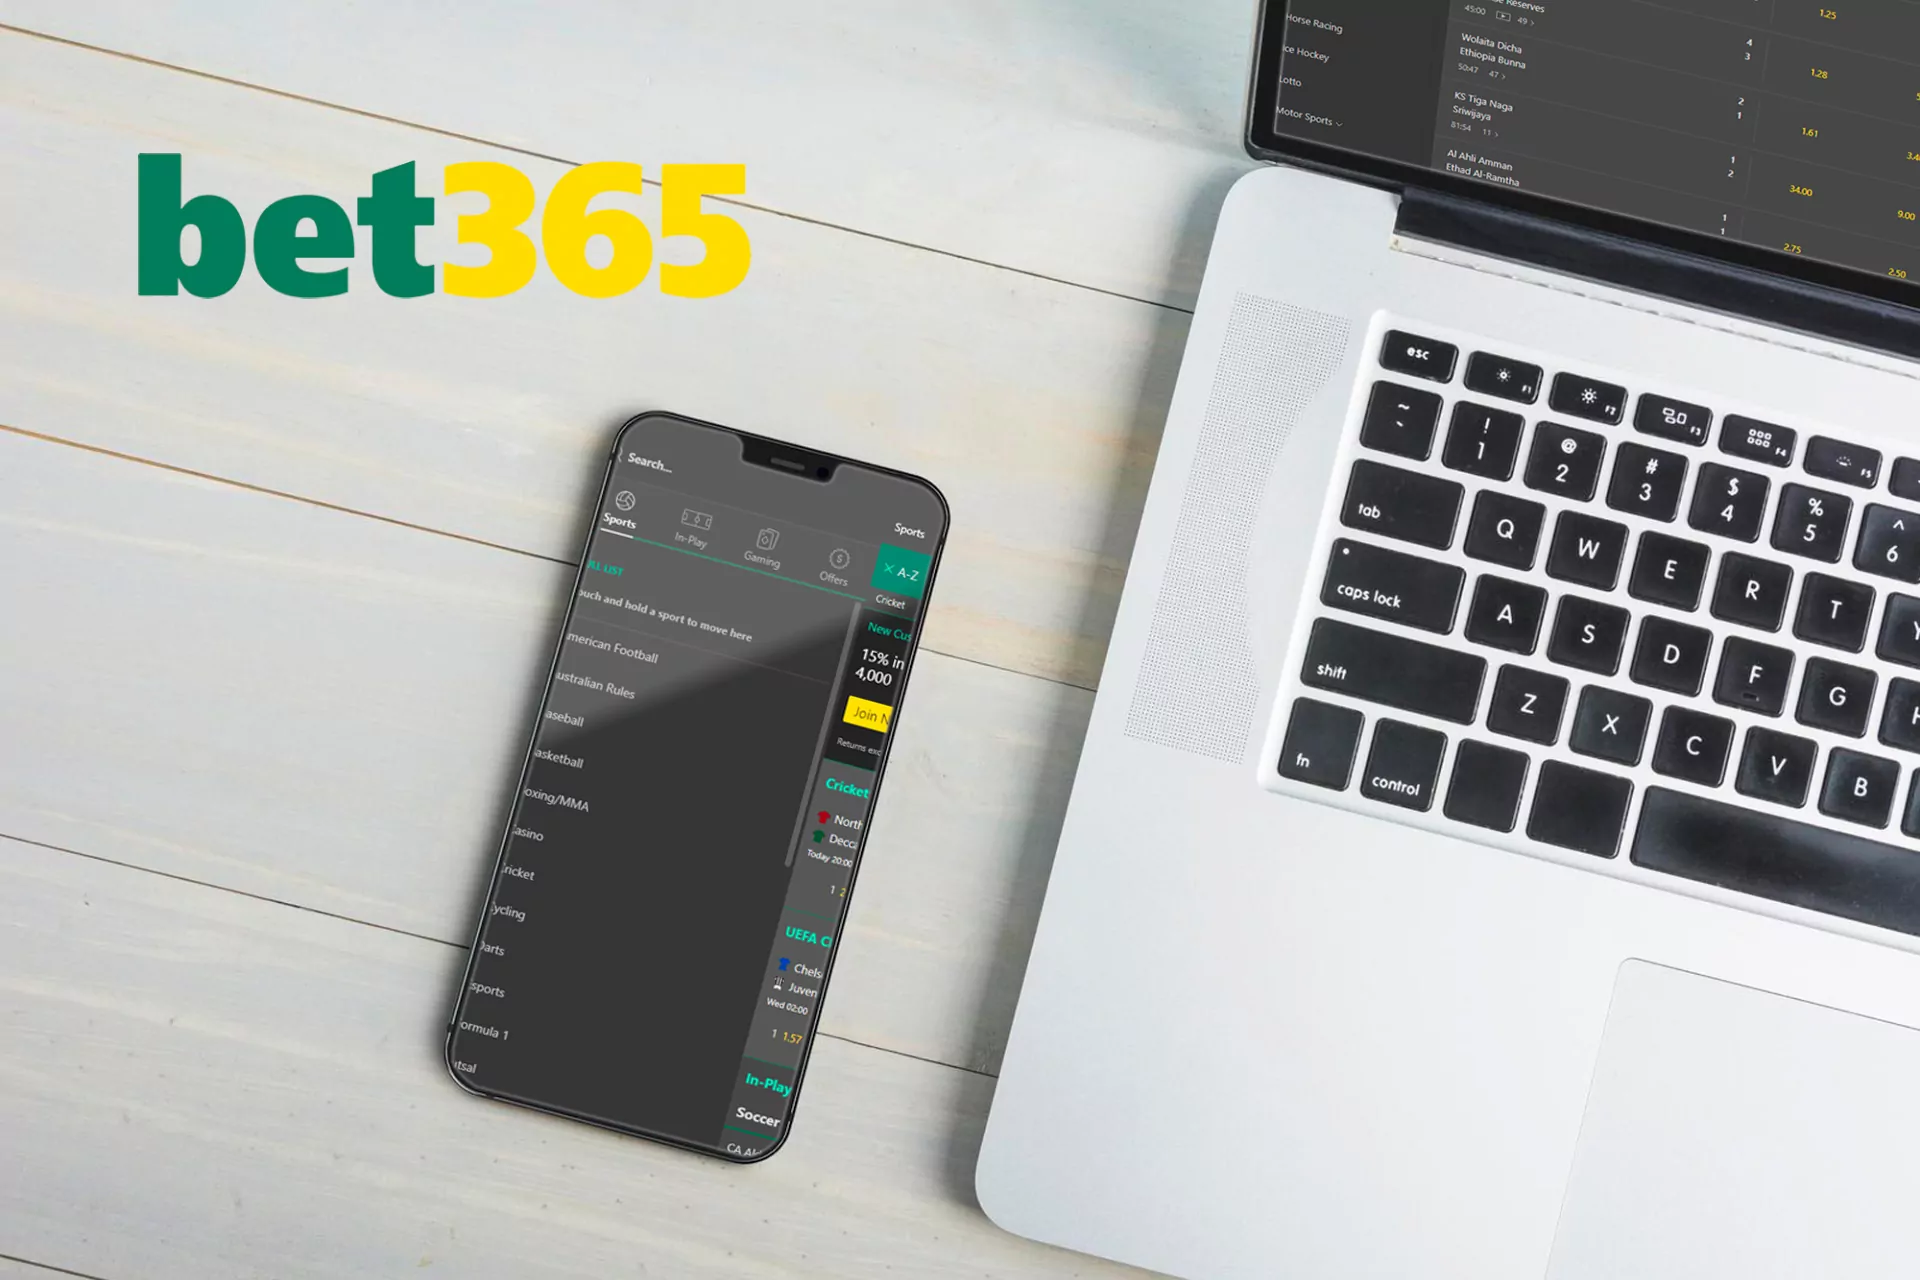 Bet365 focuses on betting on football but you can place bets on others sports matches as well.